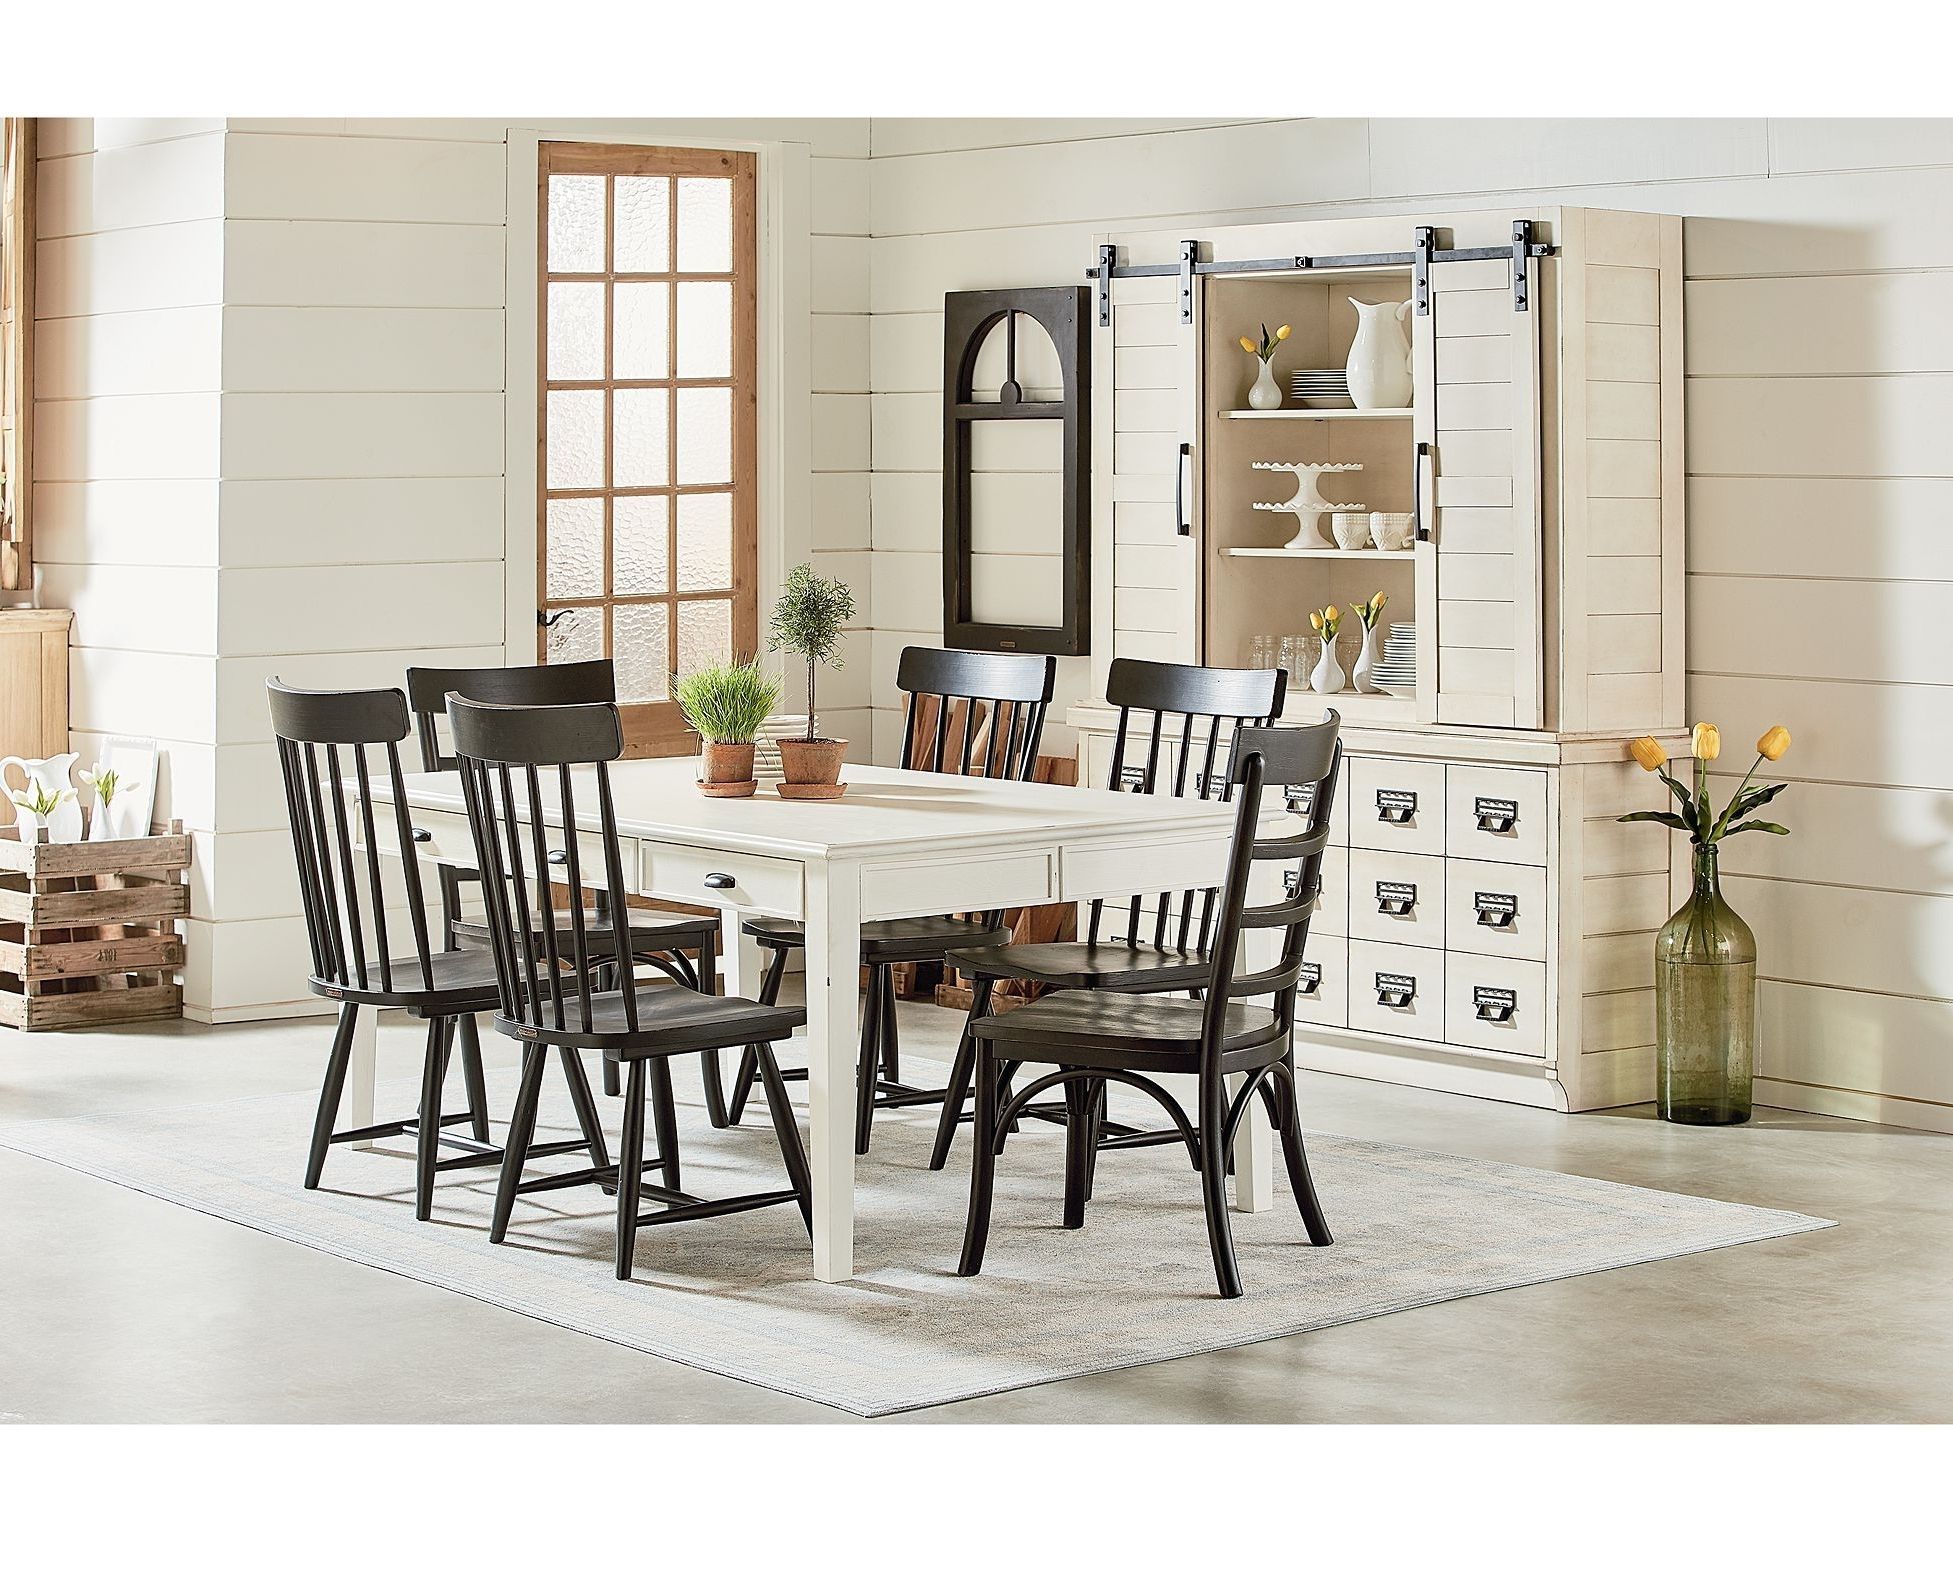 Newest Magnolia Home Harper Chimney Side Chairs Pertaining To Simple Yet Rustically Charming, The Magnolia Home Farmhouse Dining (View 12 of 20)